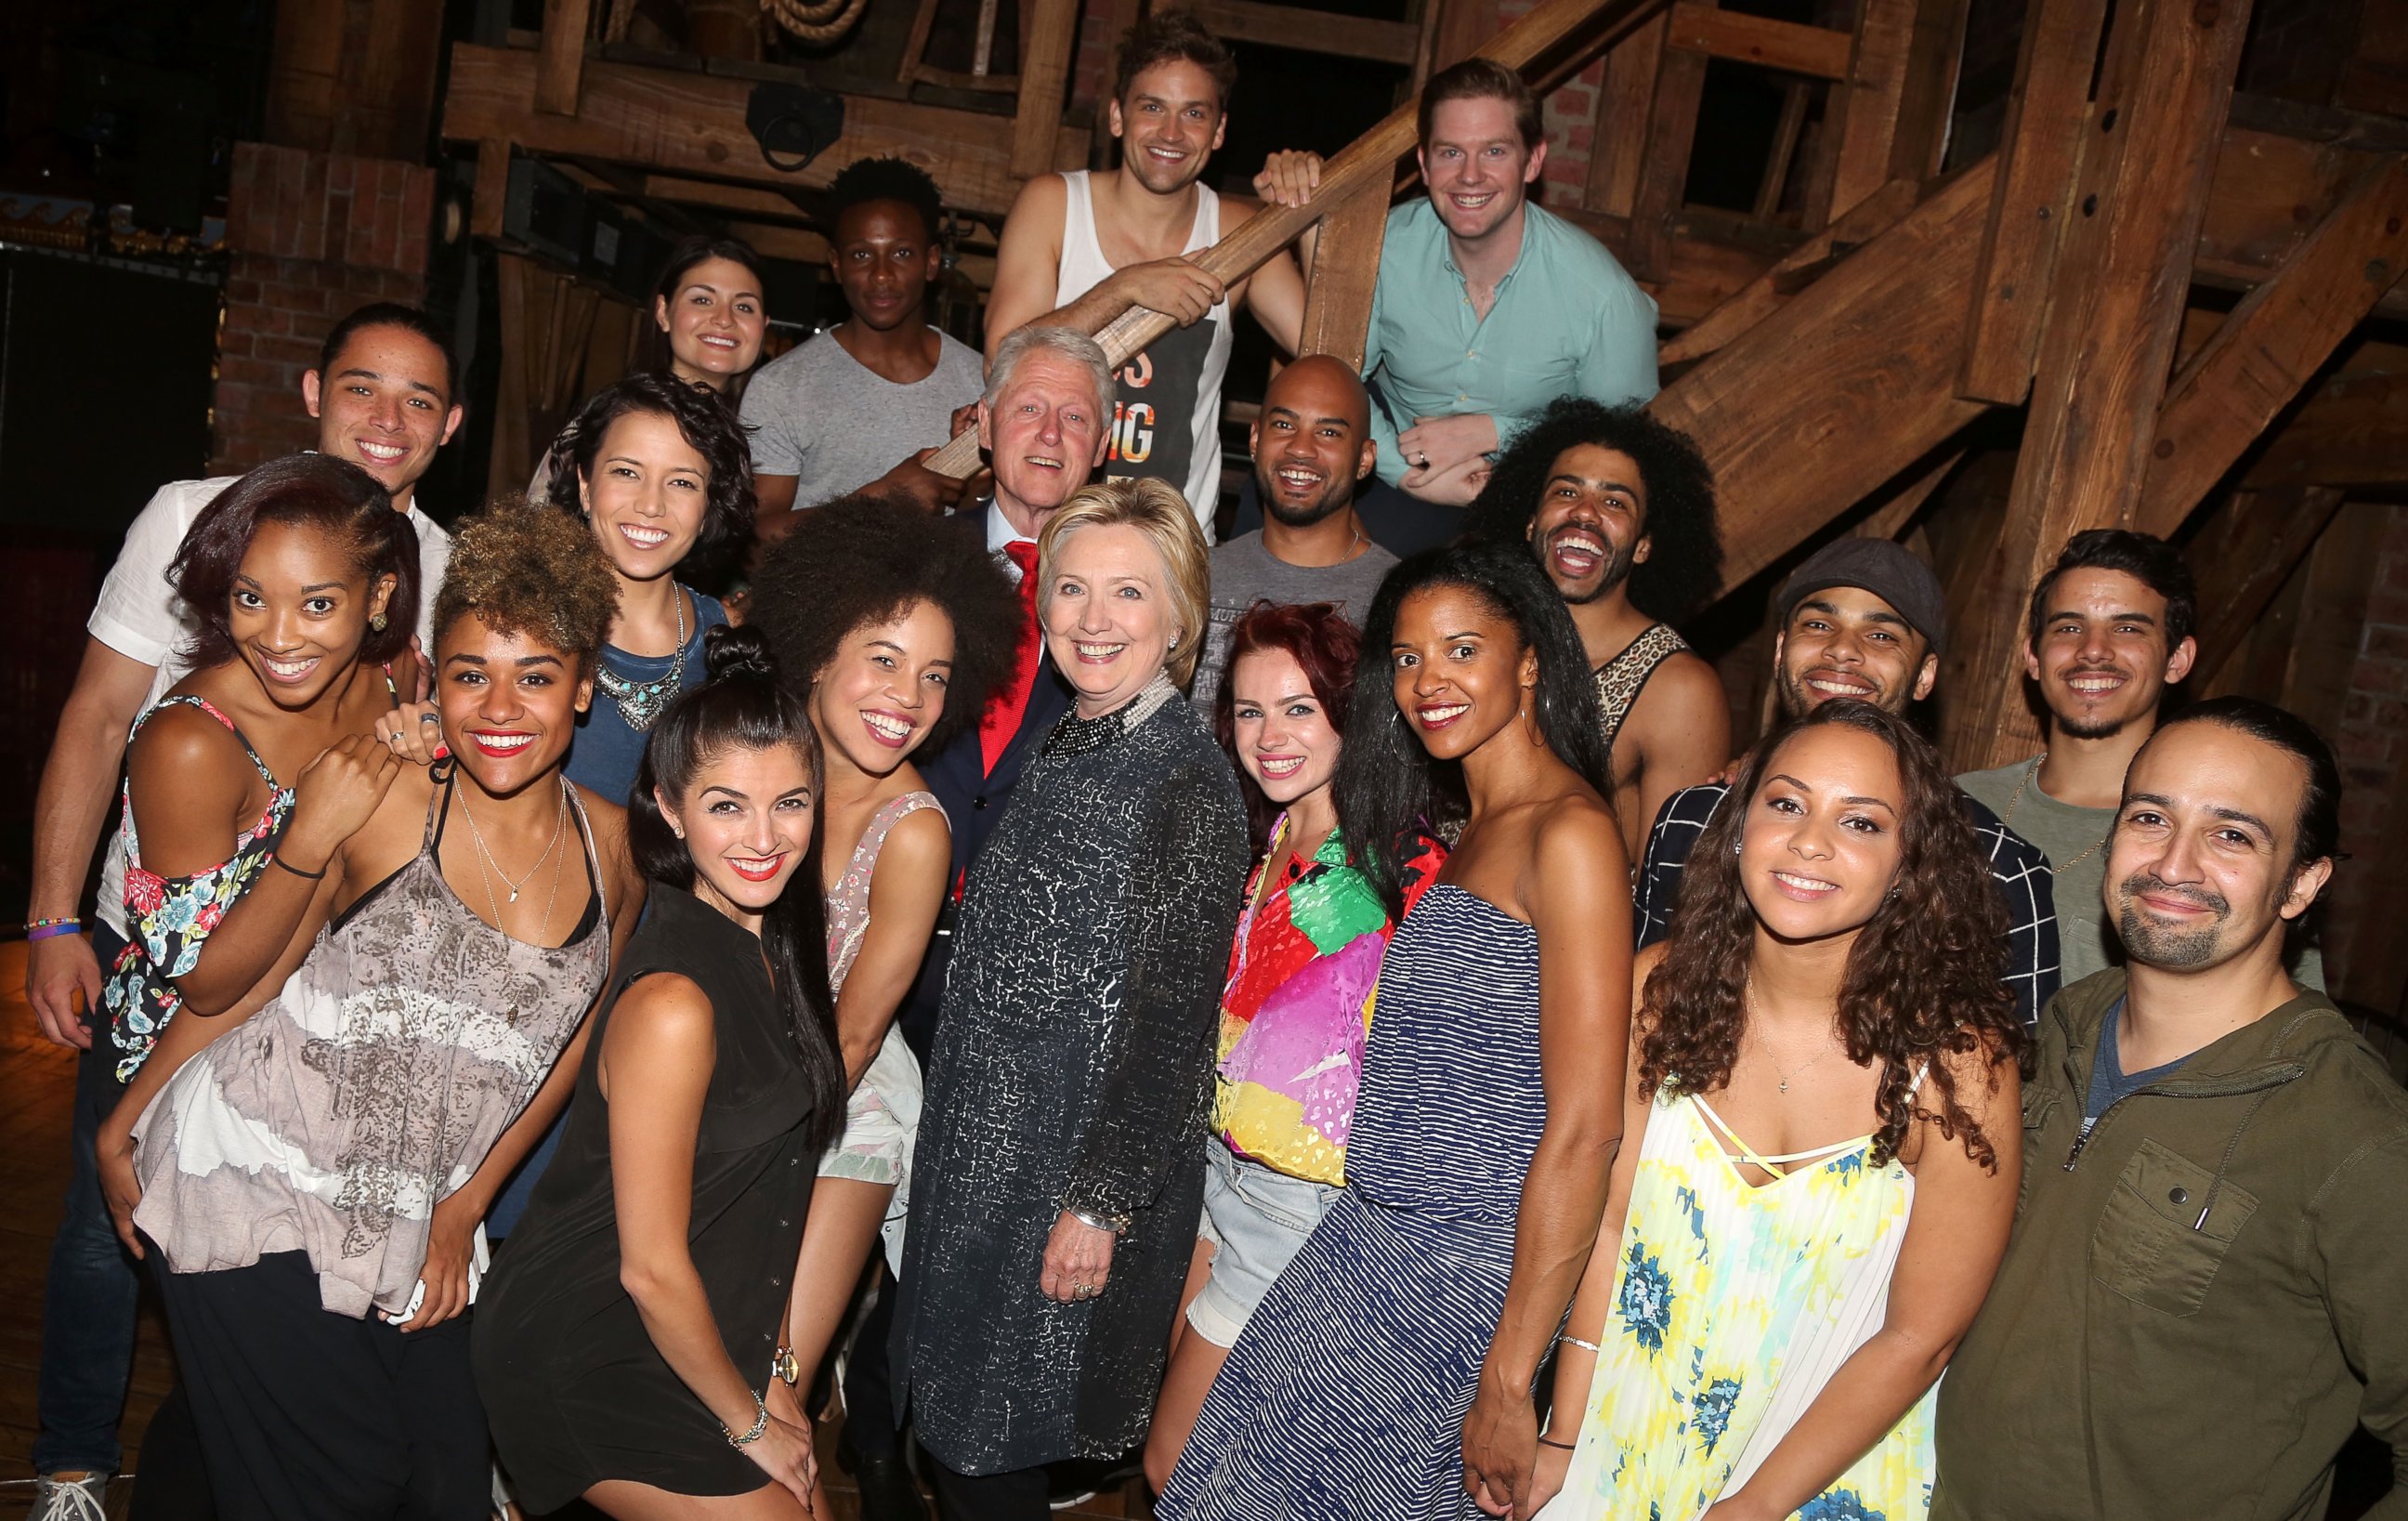 PHOTO: Hillary Clinton, Bill Clinton and Lin-Manuel Miranda pose backstage with the cast at the hit musical "Hamilton" on Broadway, July 2, 2016, in New York City.